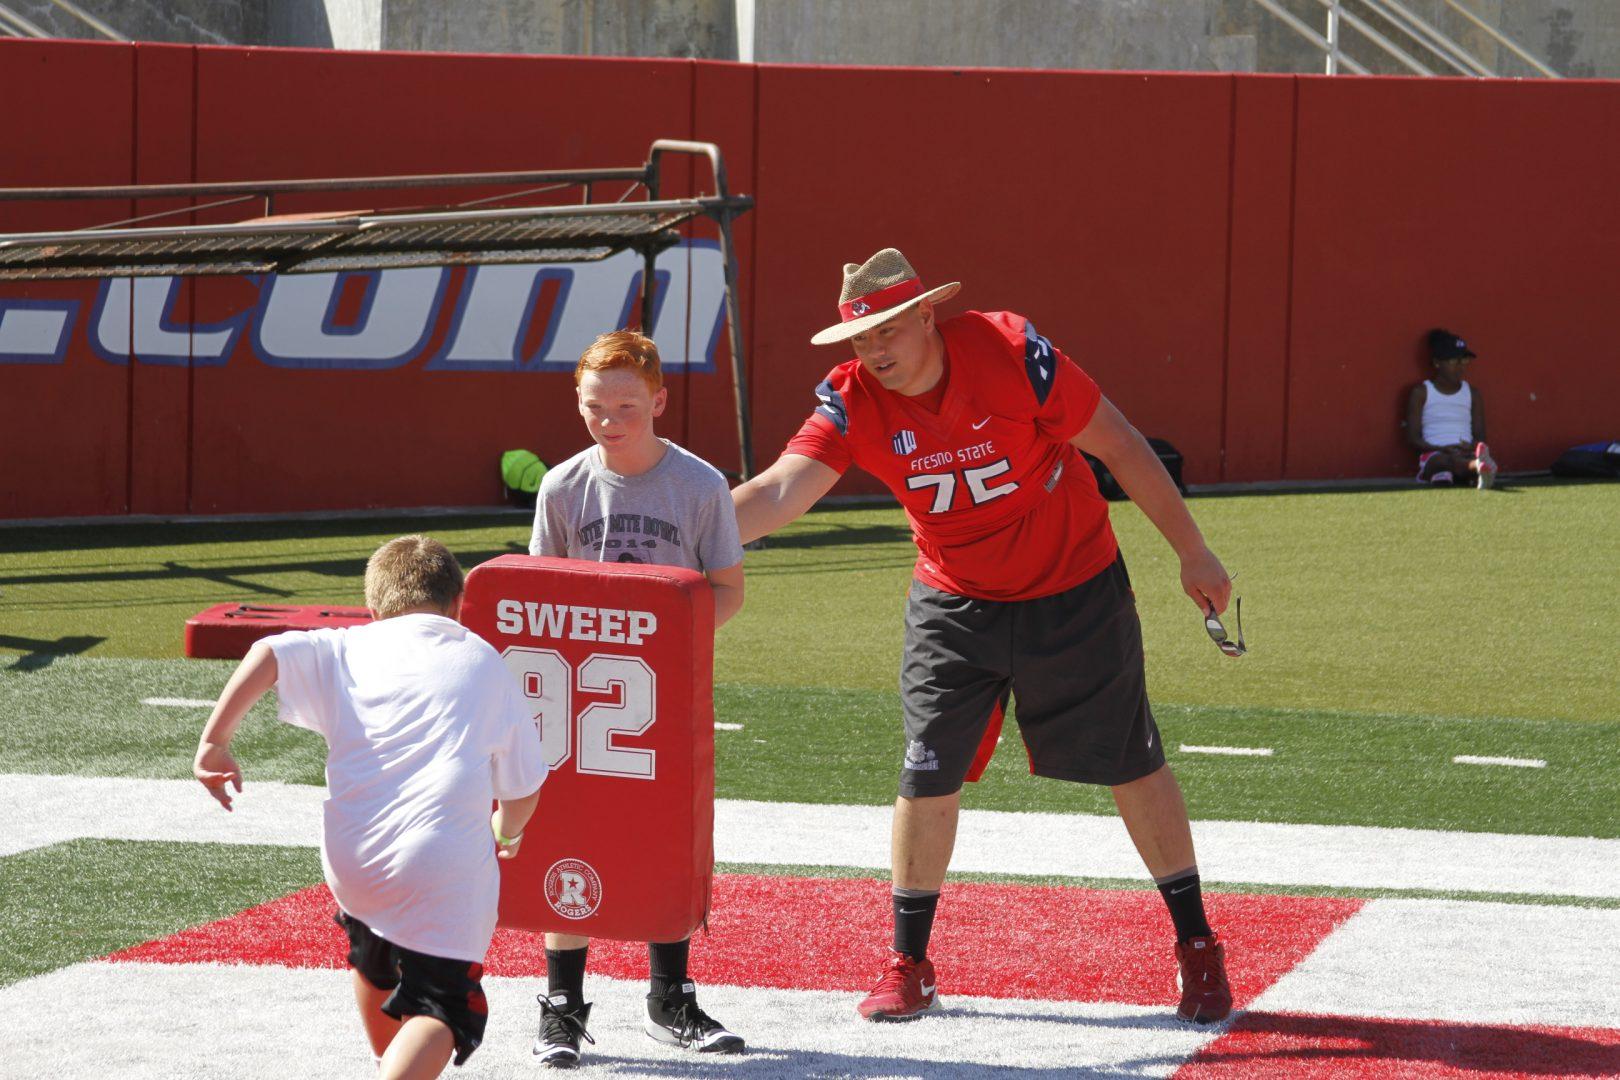 Offensive+lineman+Jacob+Vazquez+volunteers+with+the+youth+at+a+Bulldog+football+clinic.+%28Fresno+State+Athletics%29